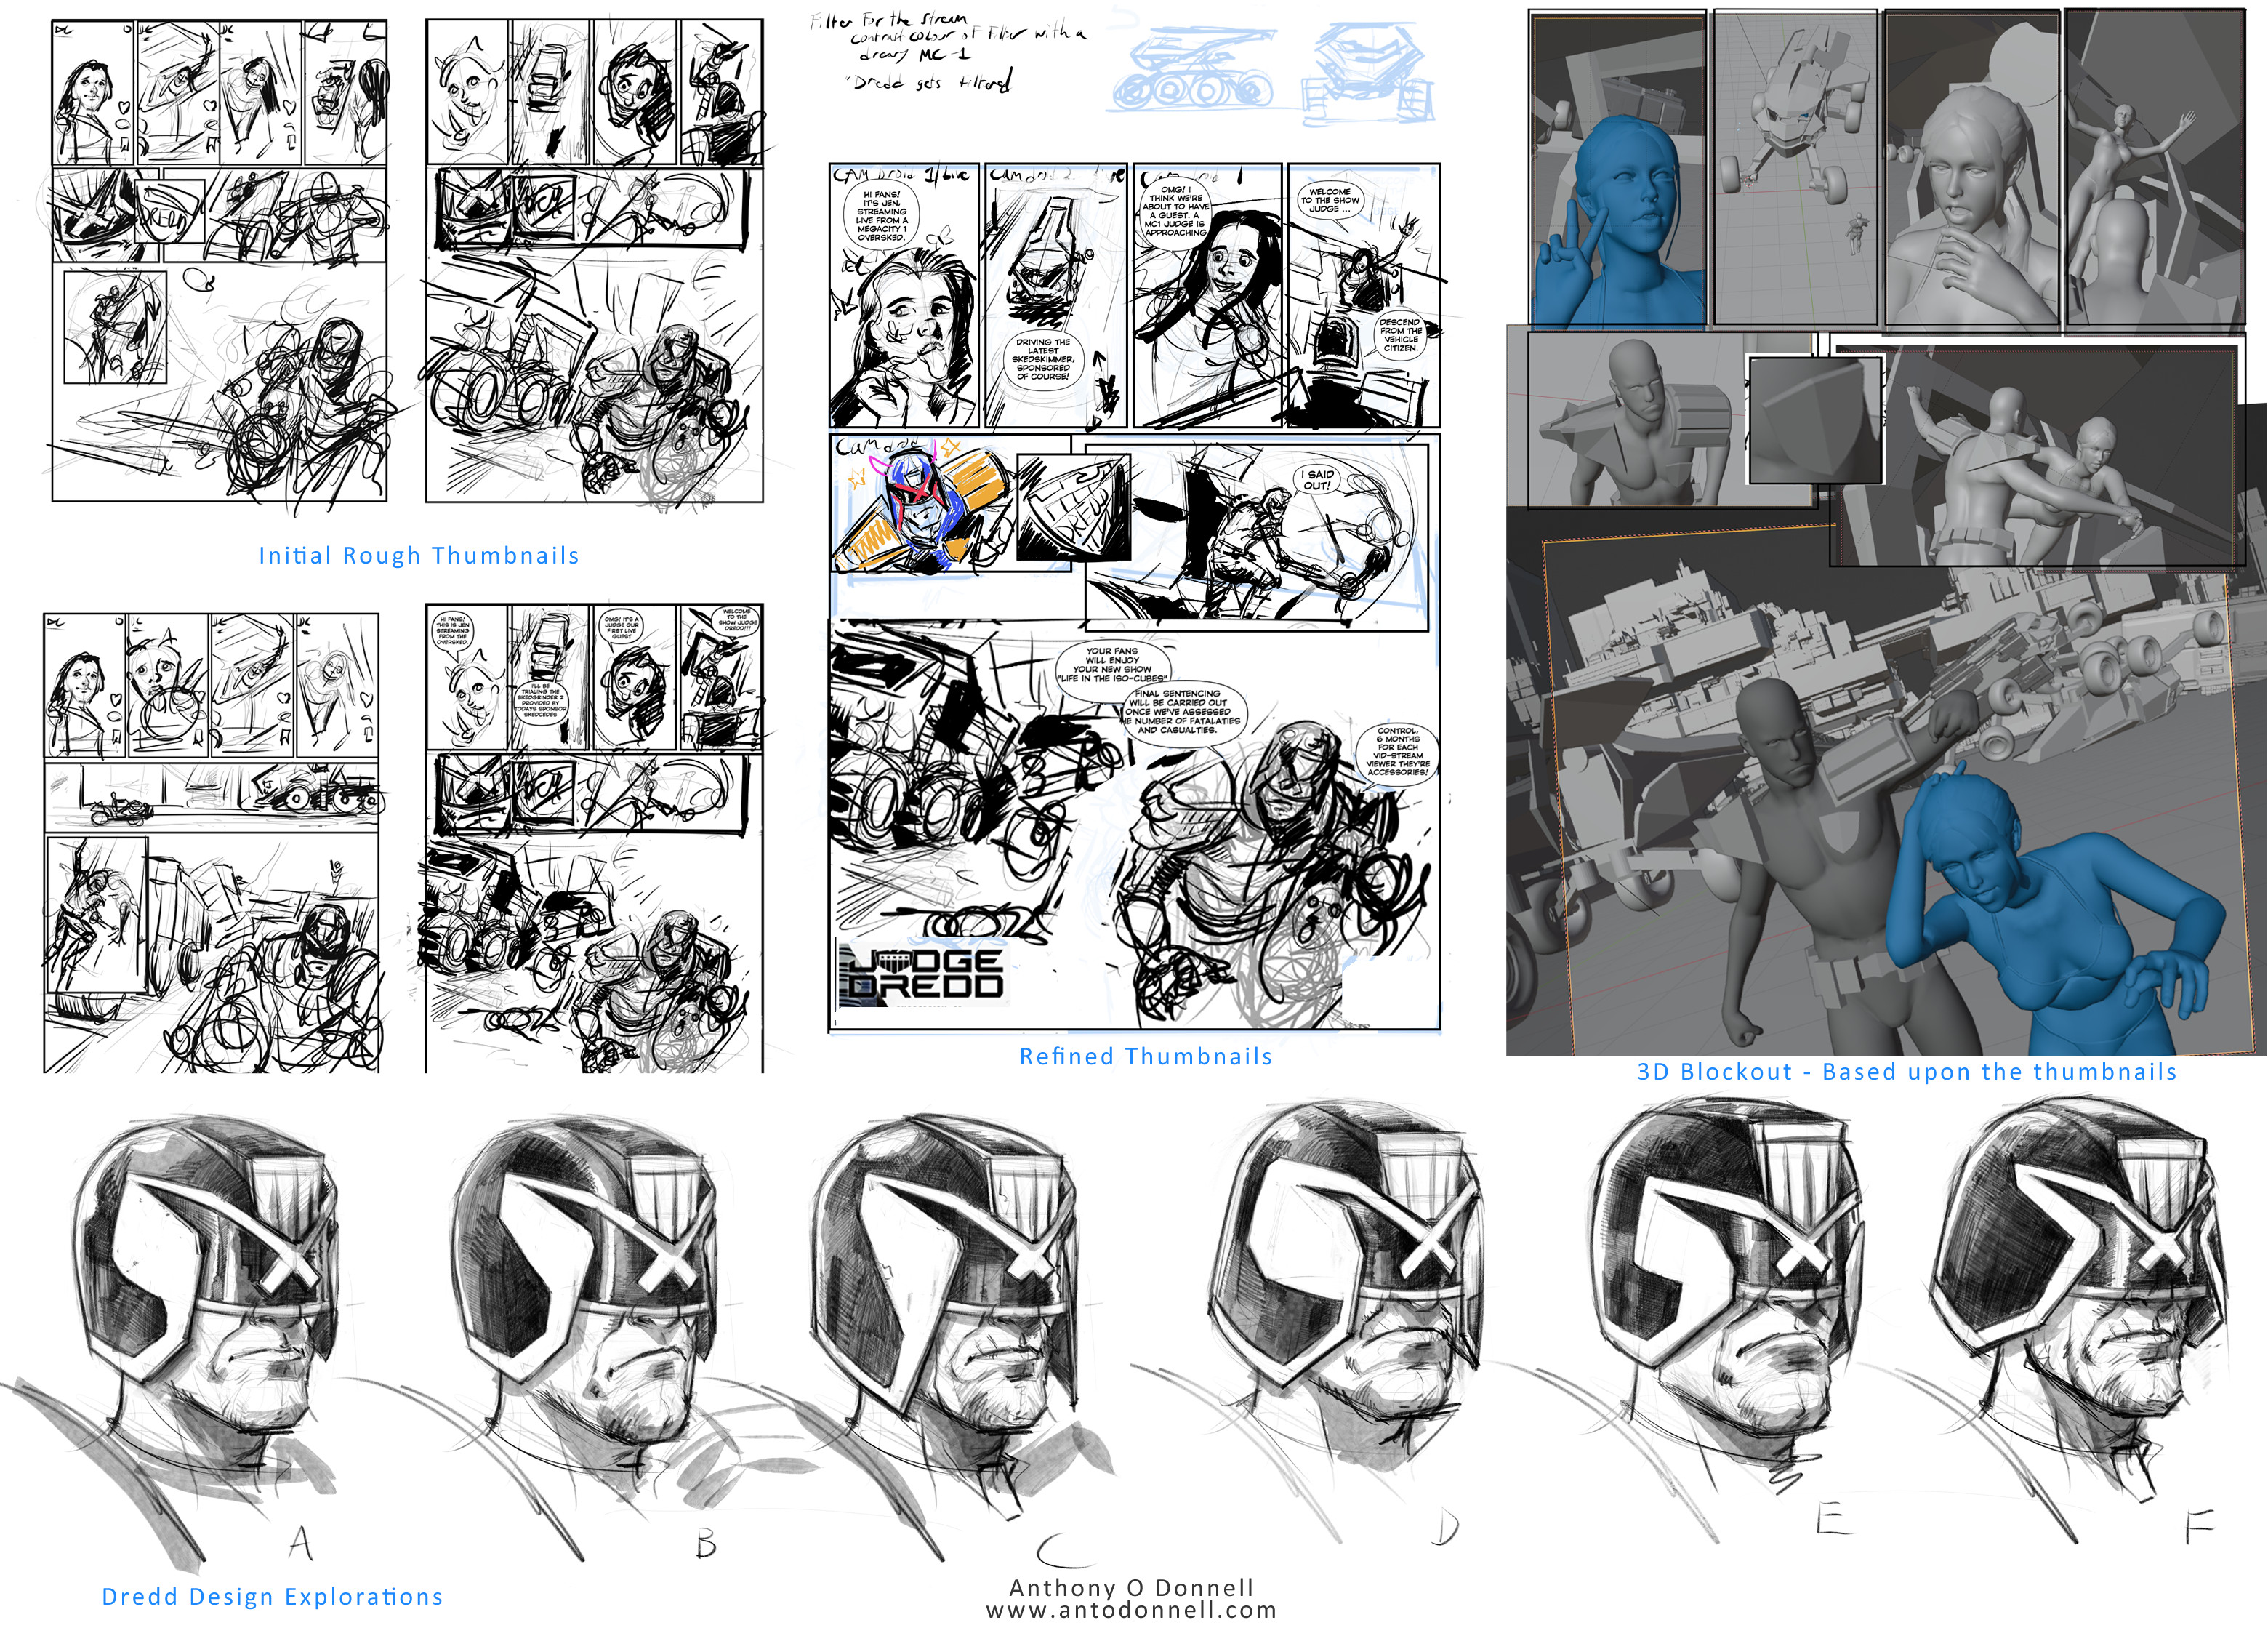 The process work to get to the pencilling stage.